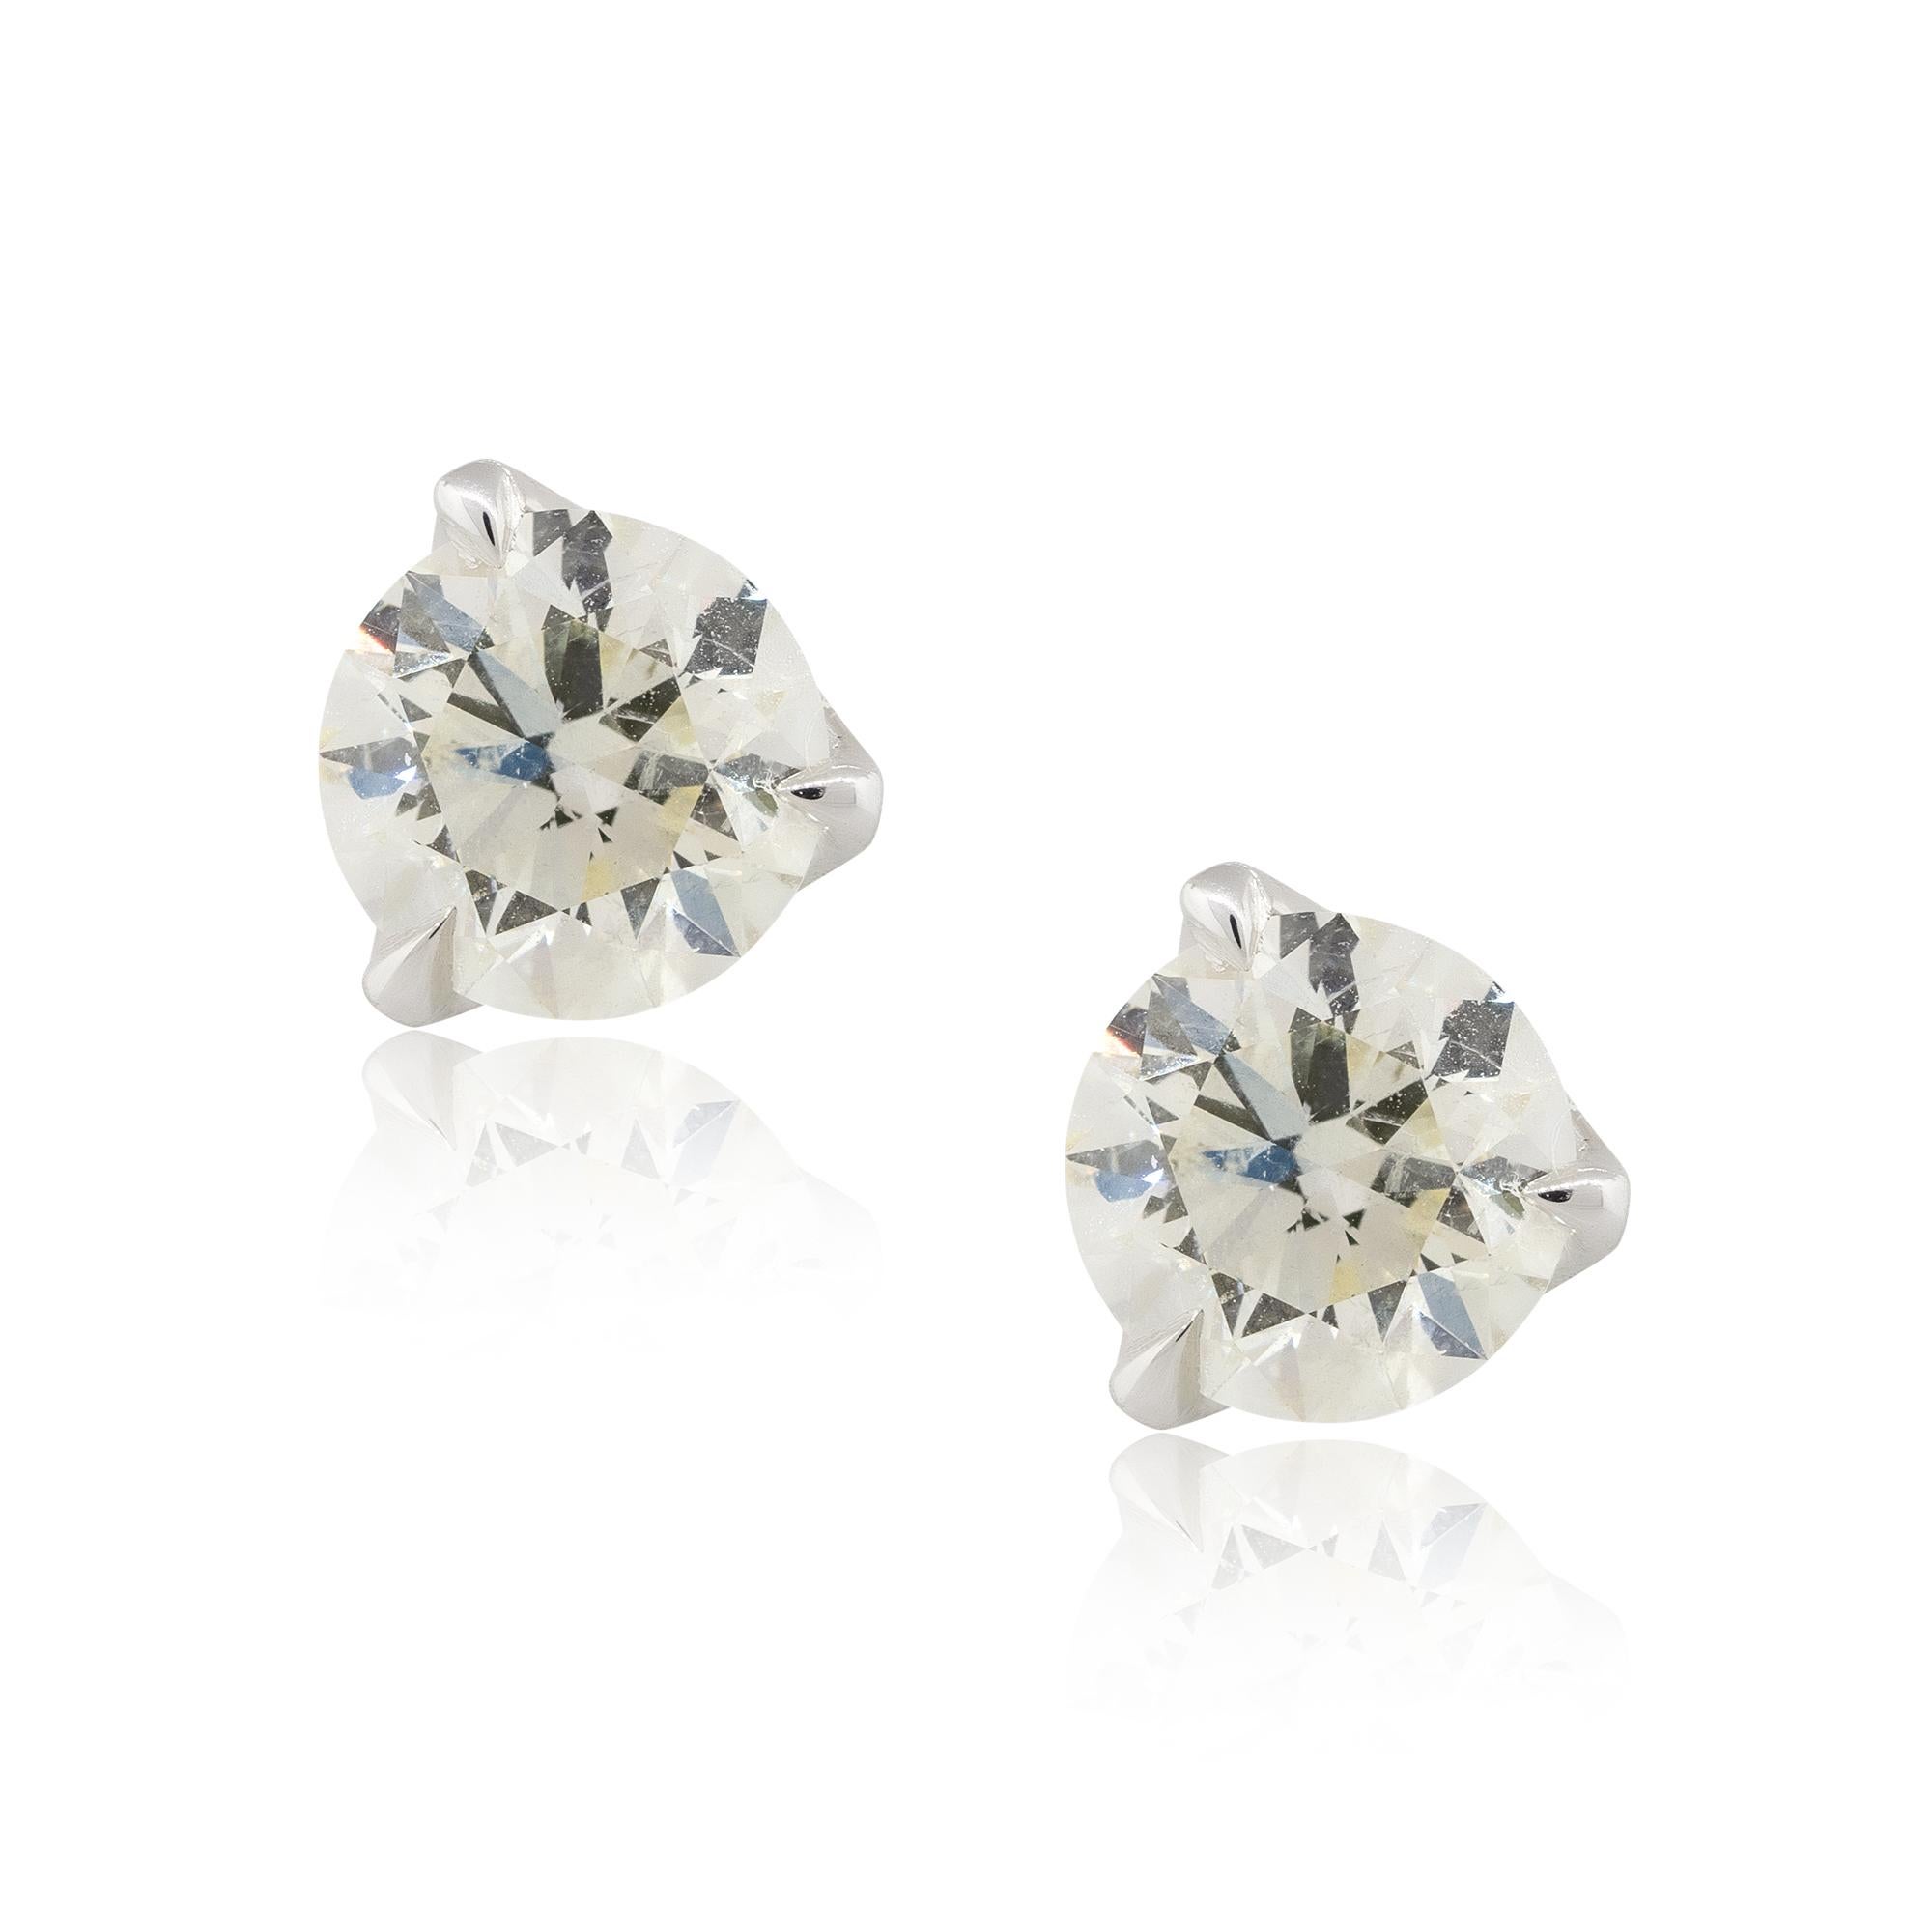 Material: 18k White Gold
Diamond Details: Approx. 3.08ctw of round cut Diamonds. Diamonds are G/H in color and VS in clarity
Measurements: 16.5mm x 8.30mm
Earrings Backs: Tension post
Total Weight: 2.1g (1.3dwt) 
Additional Details: This item comes